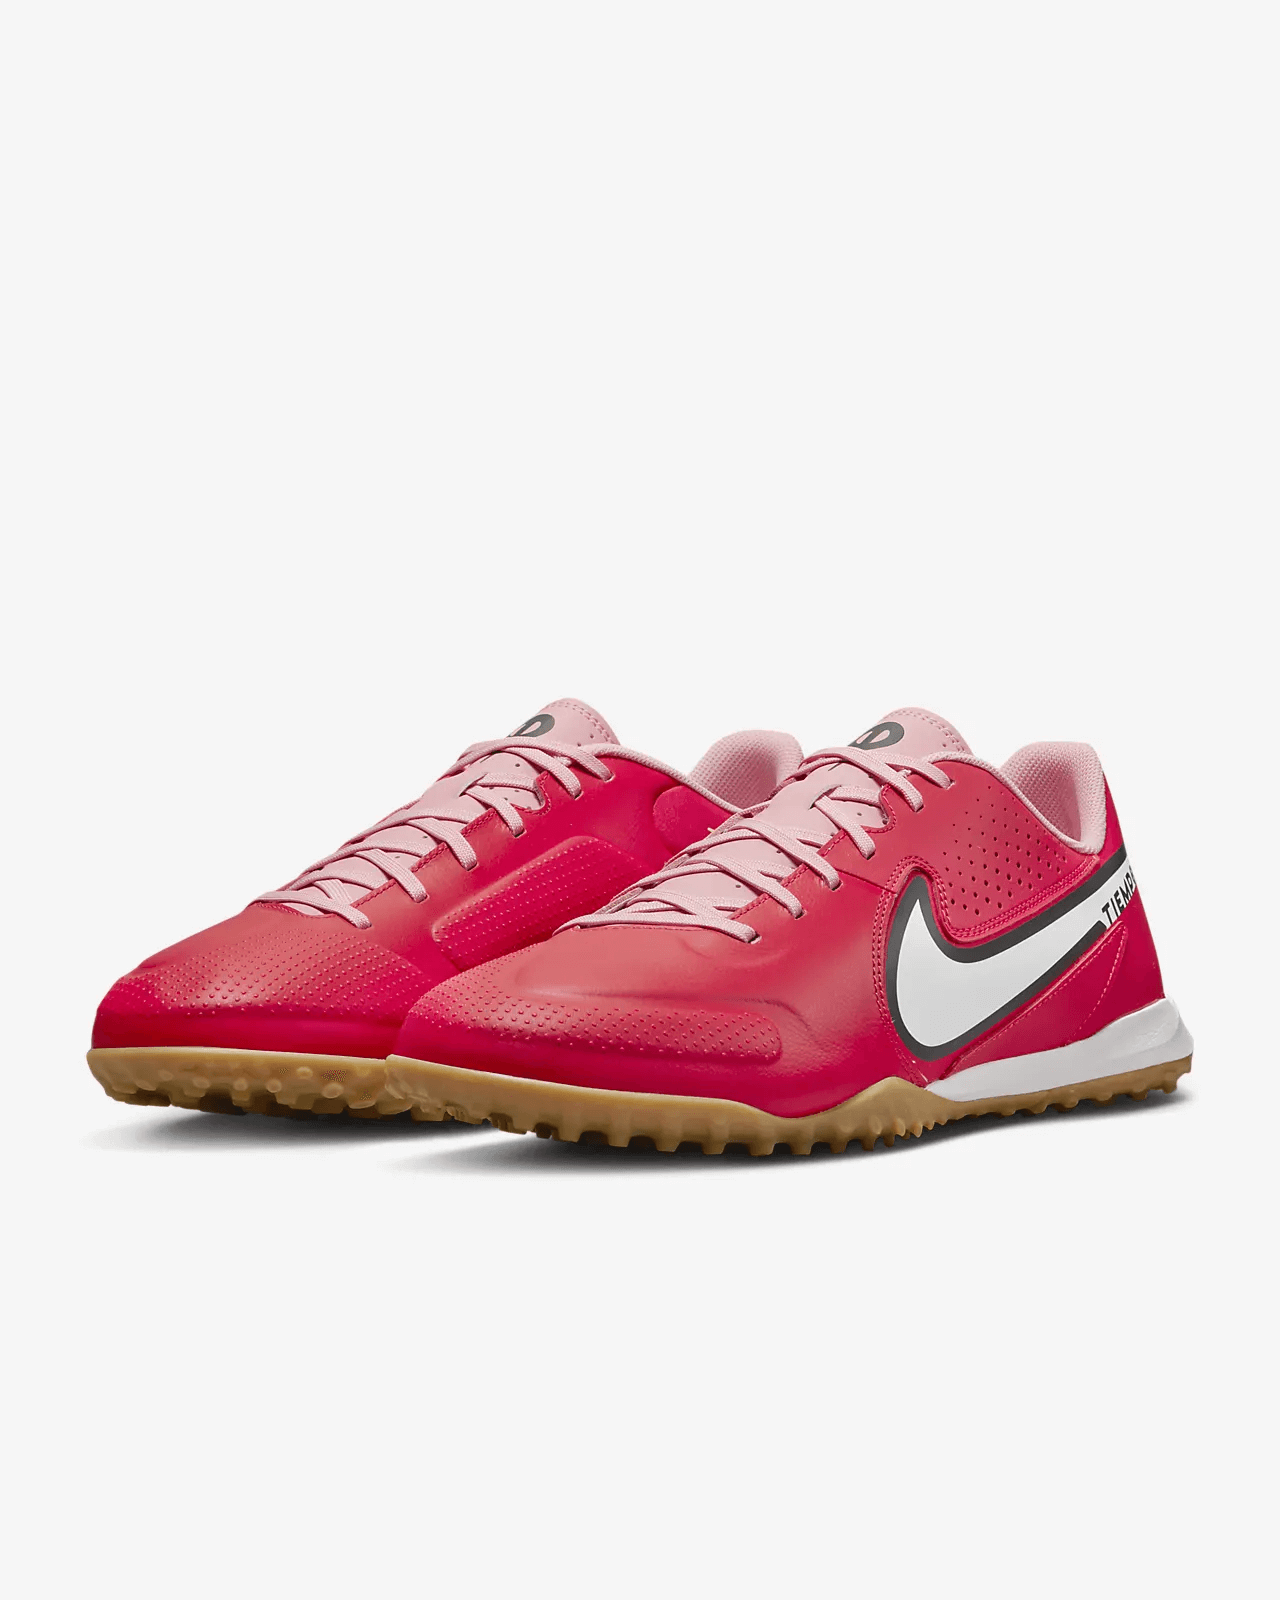 Nike Legend 9 Academy Turf - Red - White (Pair - Lateral)